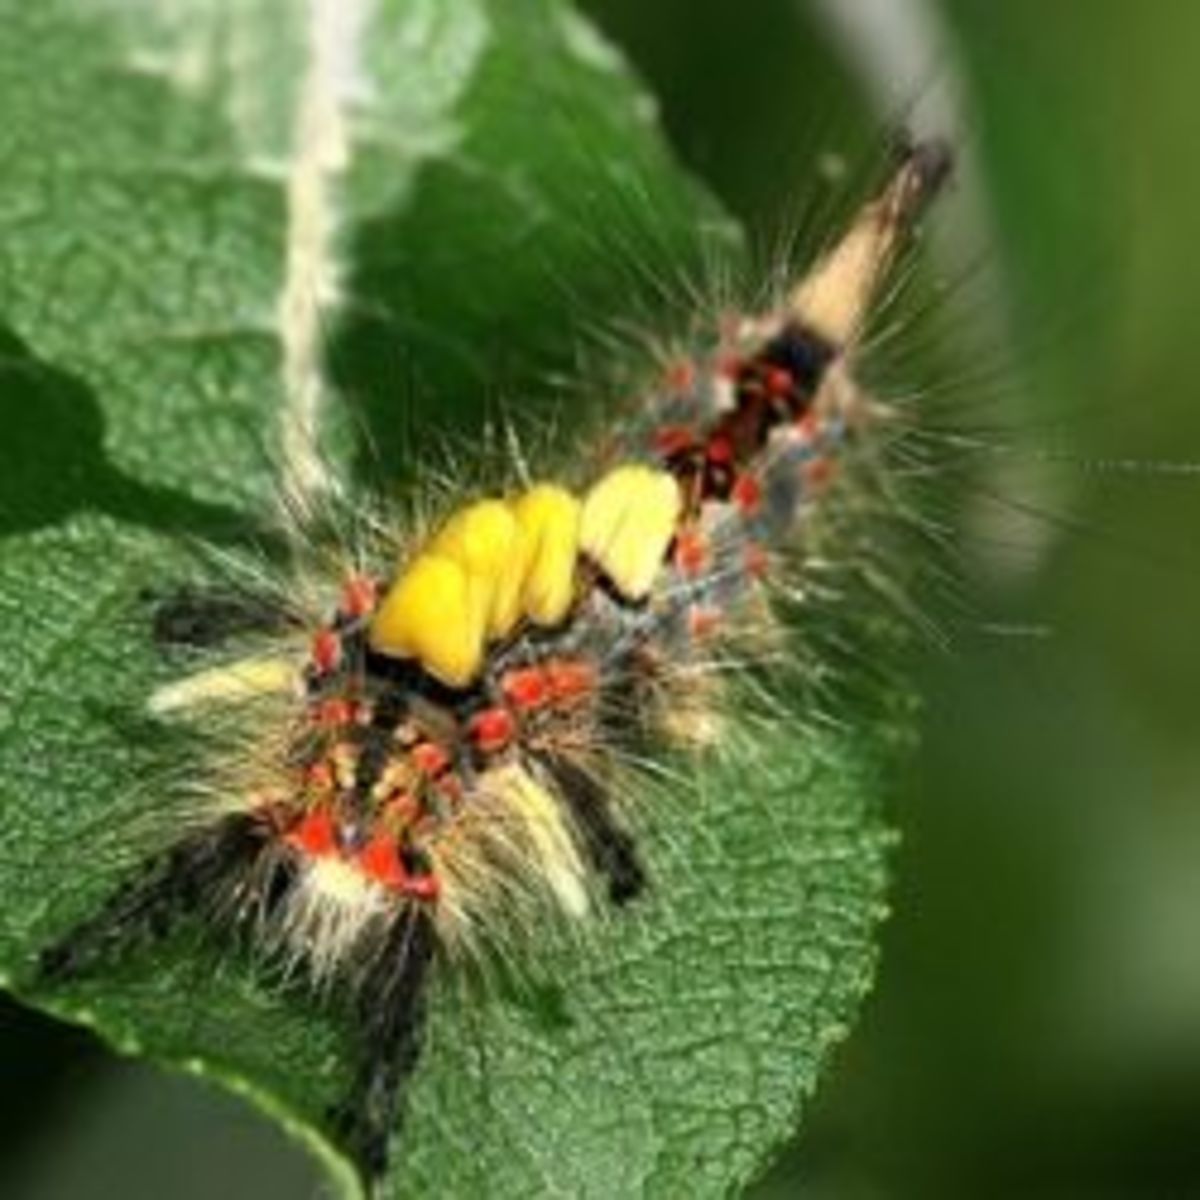 The Vapourer Moth: Wingless Females and Hairy Caterpillars